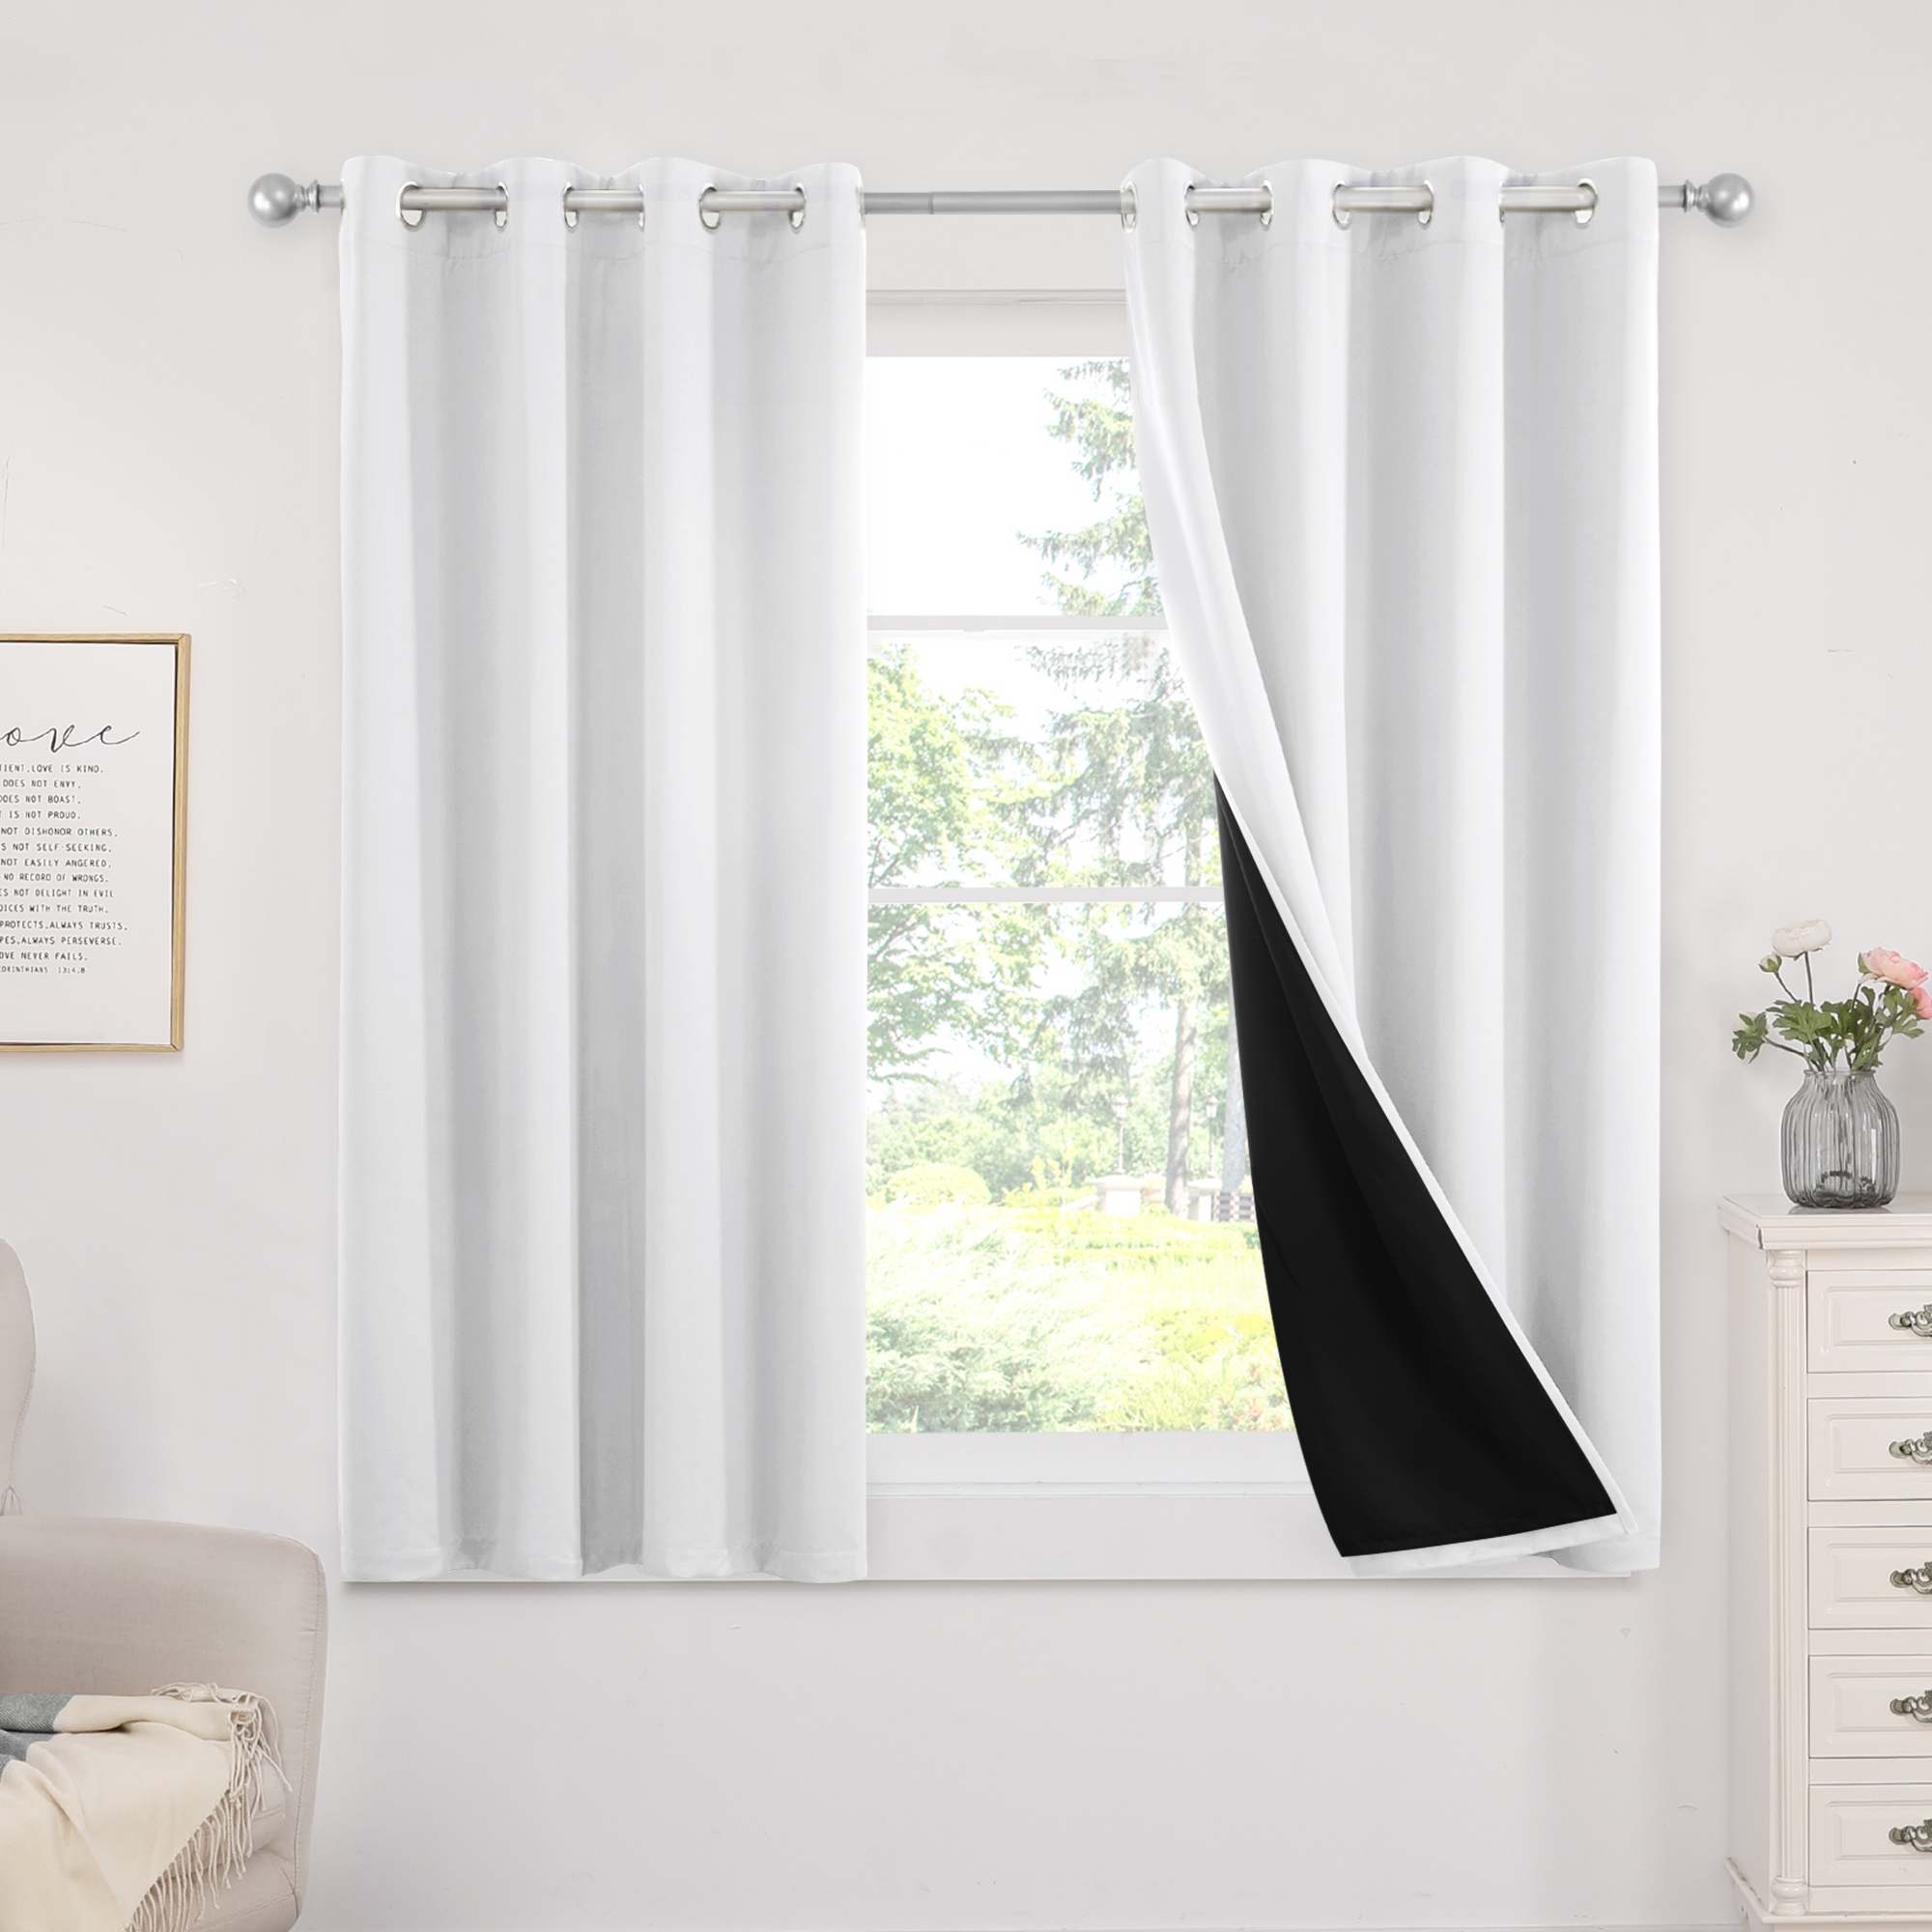 Deconovo Double Layer Full Blackout Curtains 2 Panels (5 colors) -$13.30 + Free Shipping w/ Prime